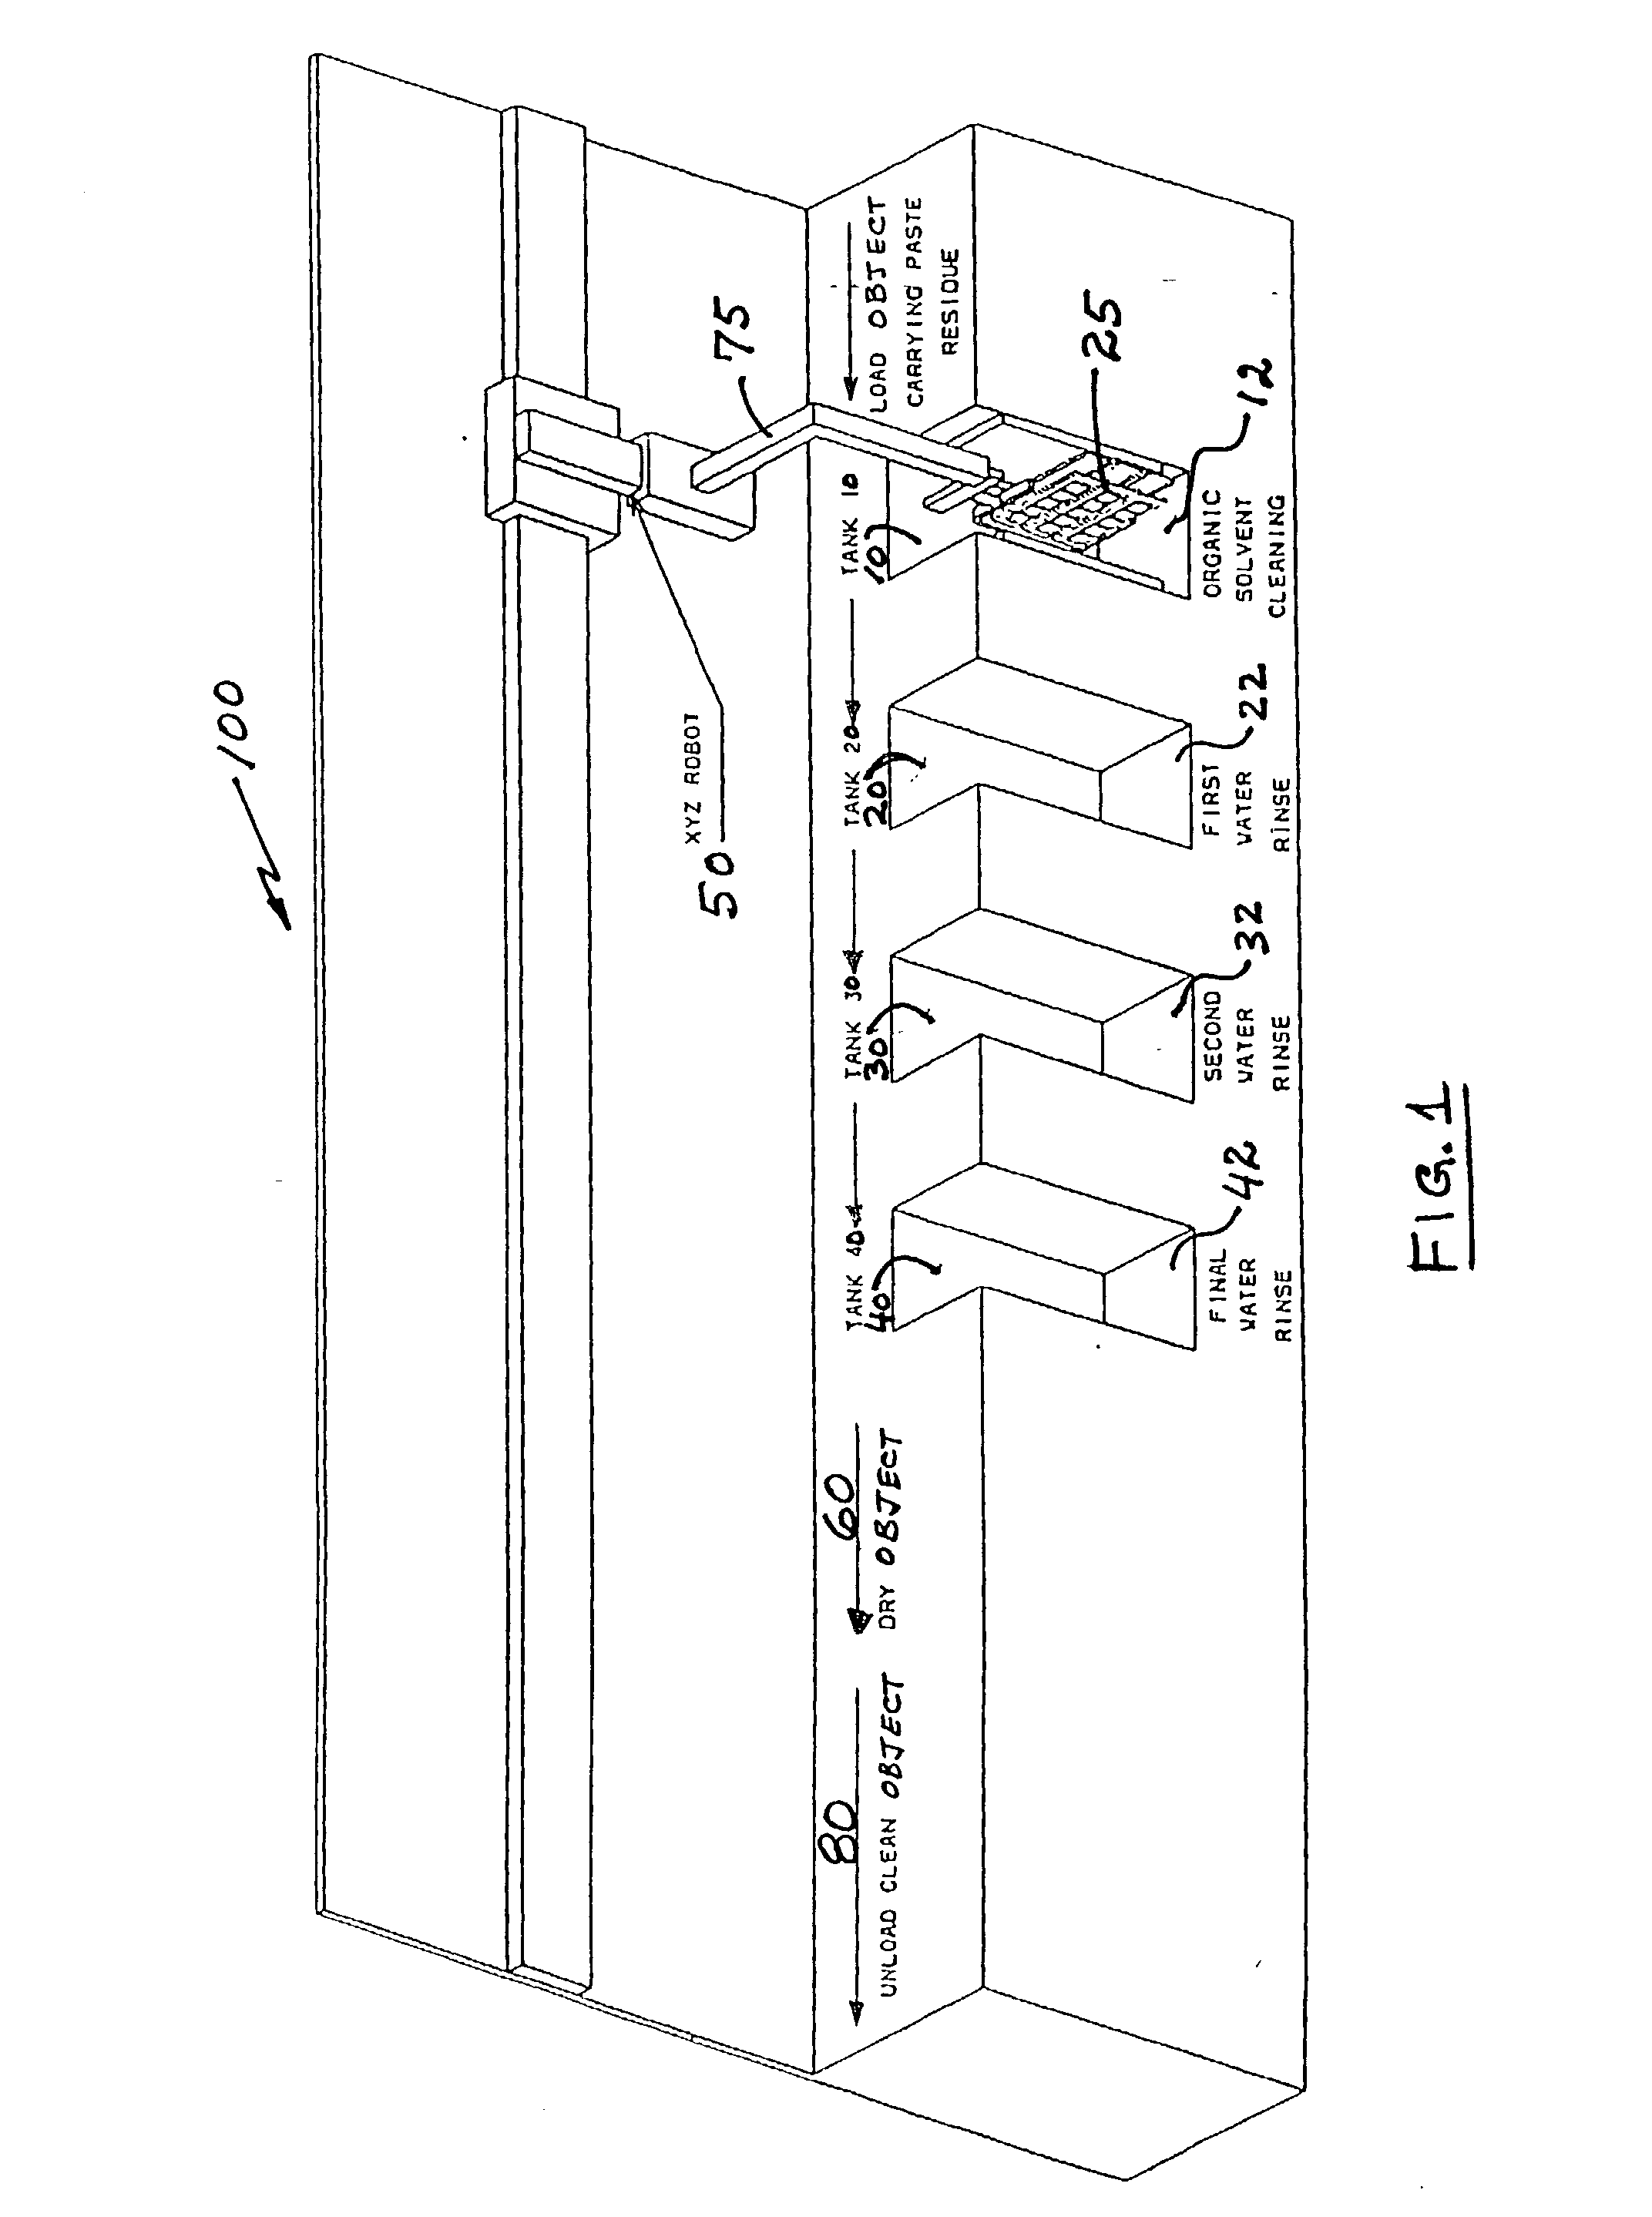 Semi-aqueous solvent cleaning of paste processing residue from substrates